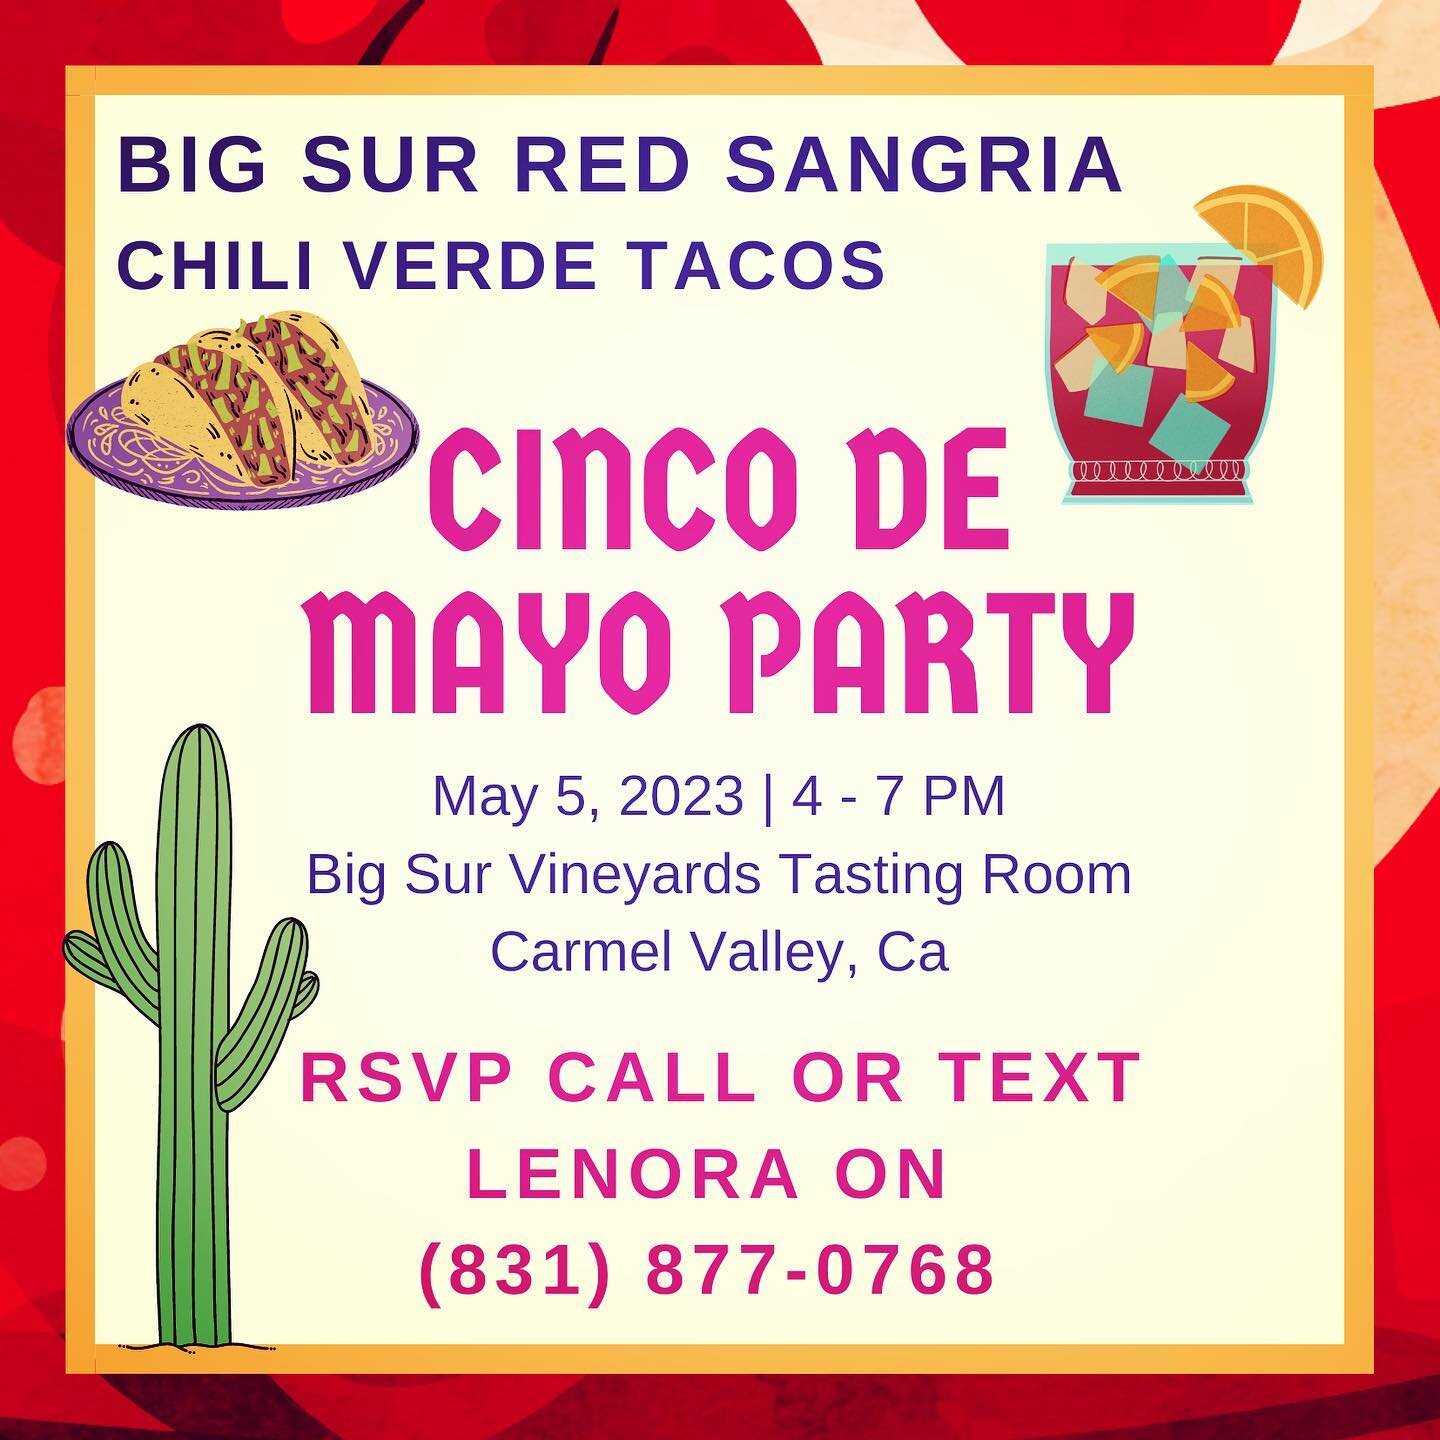 Well it&rsquo;s been a few years since I made my famous Sangria! Stop in tomorrow for a glass and a couple of street tacos. Let&rsquo;s celebrate! Hope you can join us. #cincodemayo #redwinesangria #winetasting #seemonterey #montereywines @bigsurvine